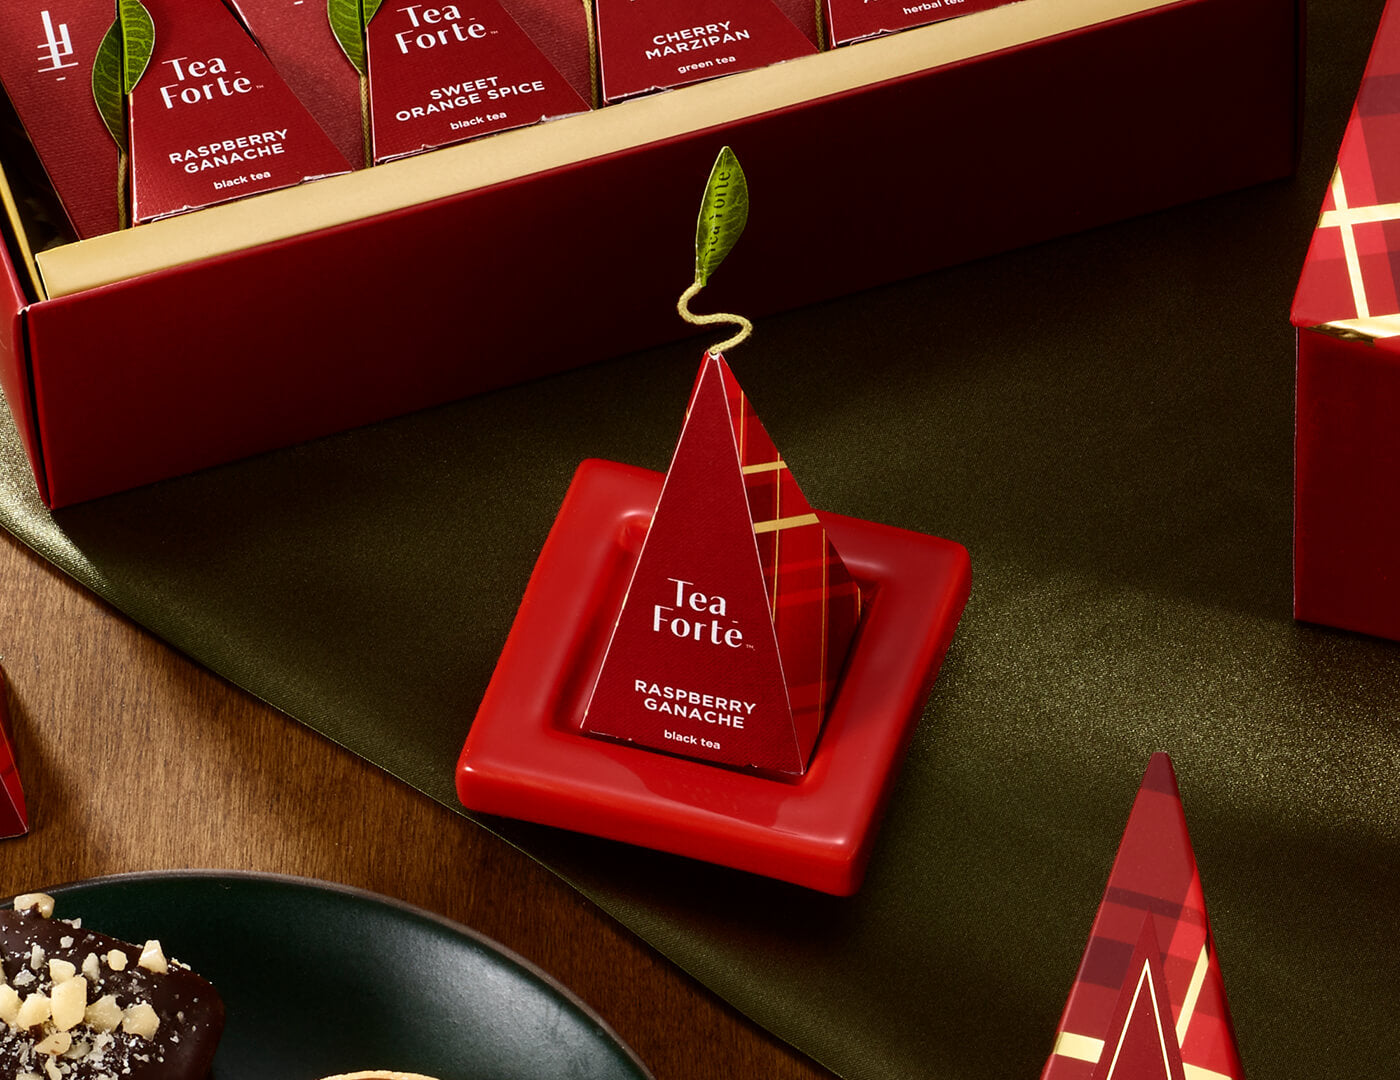 Ruby Red Tea Tray with infuser perched on top resting on festive table with a Warming Joy Petite Box open